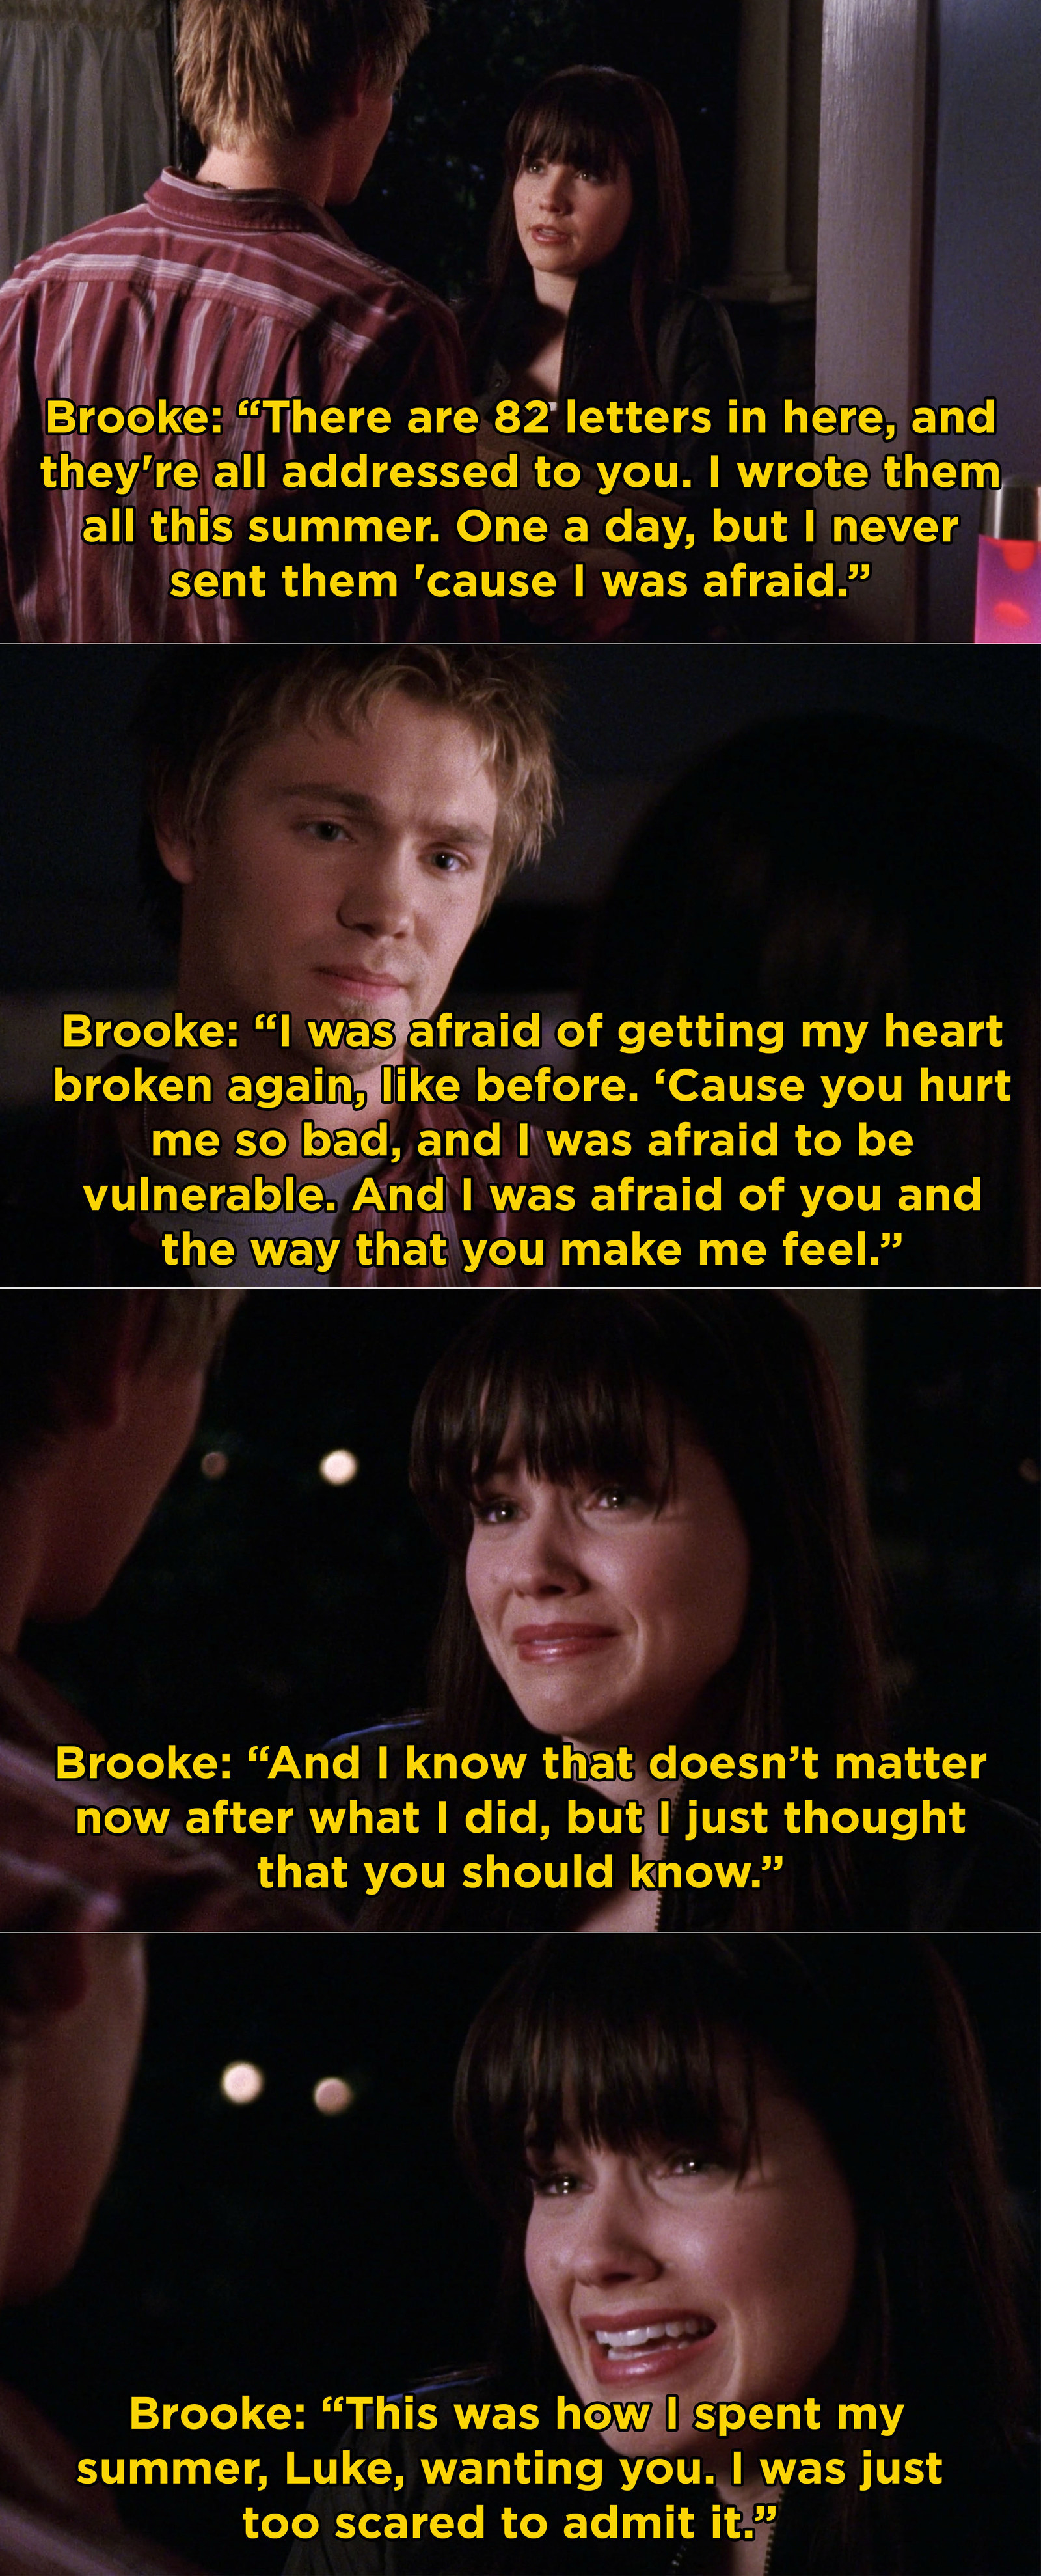 Brooke telling Lucas: &quot;There are 82 letters in here, and they&#x27;re all addressed to you. I wrote them all this summer. One a day, but I never sent them &#x27;cause I was afraid. I was afraid of getting my heart broken again, like before...&quot;